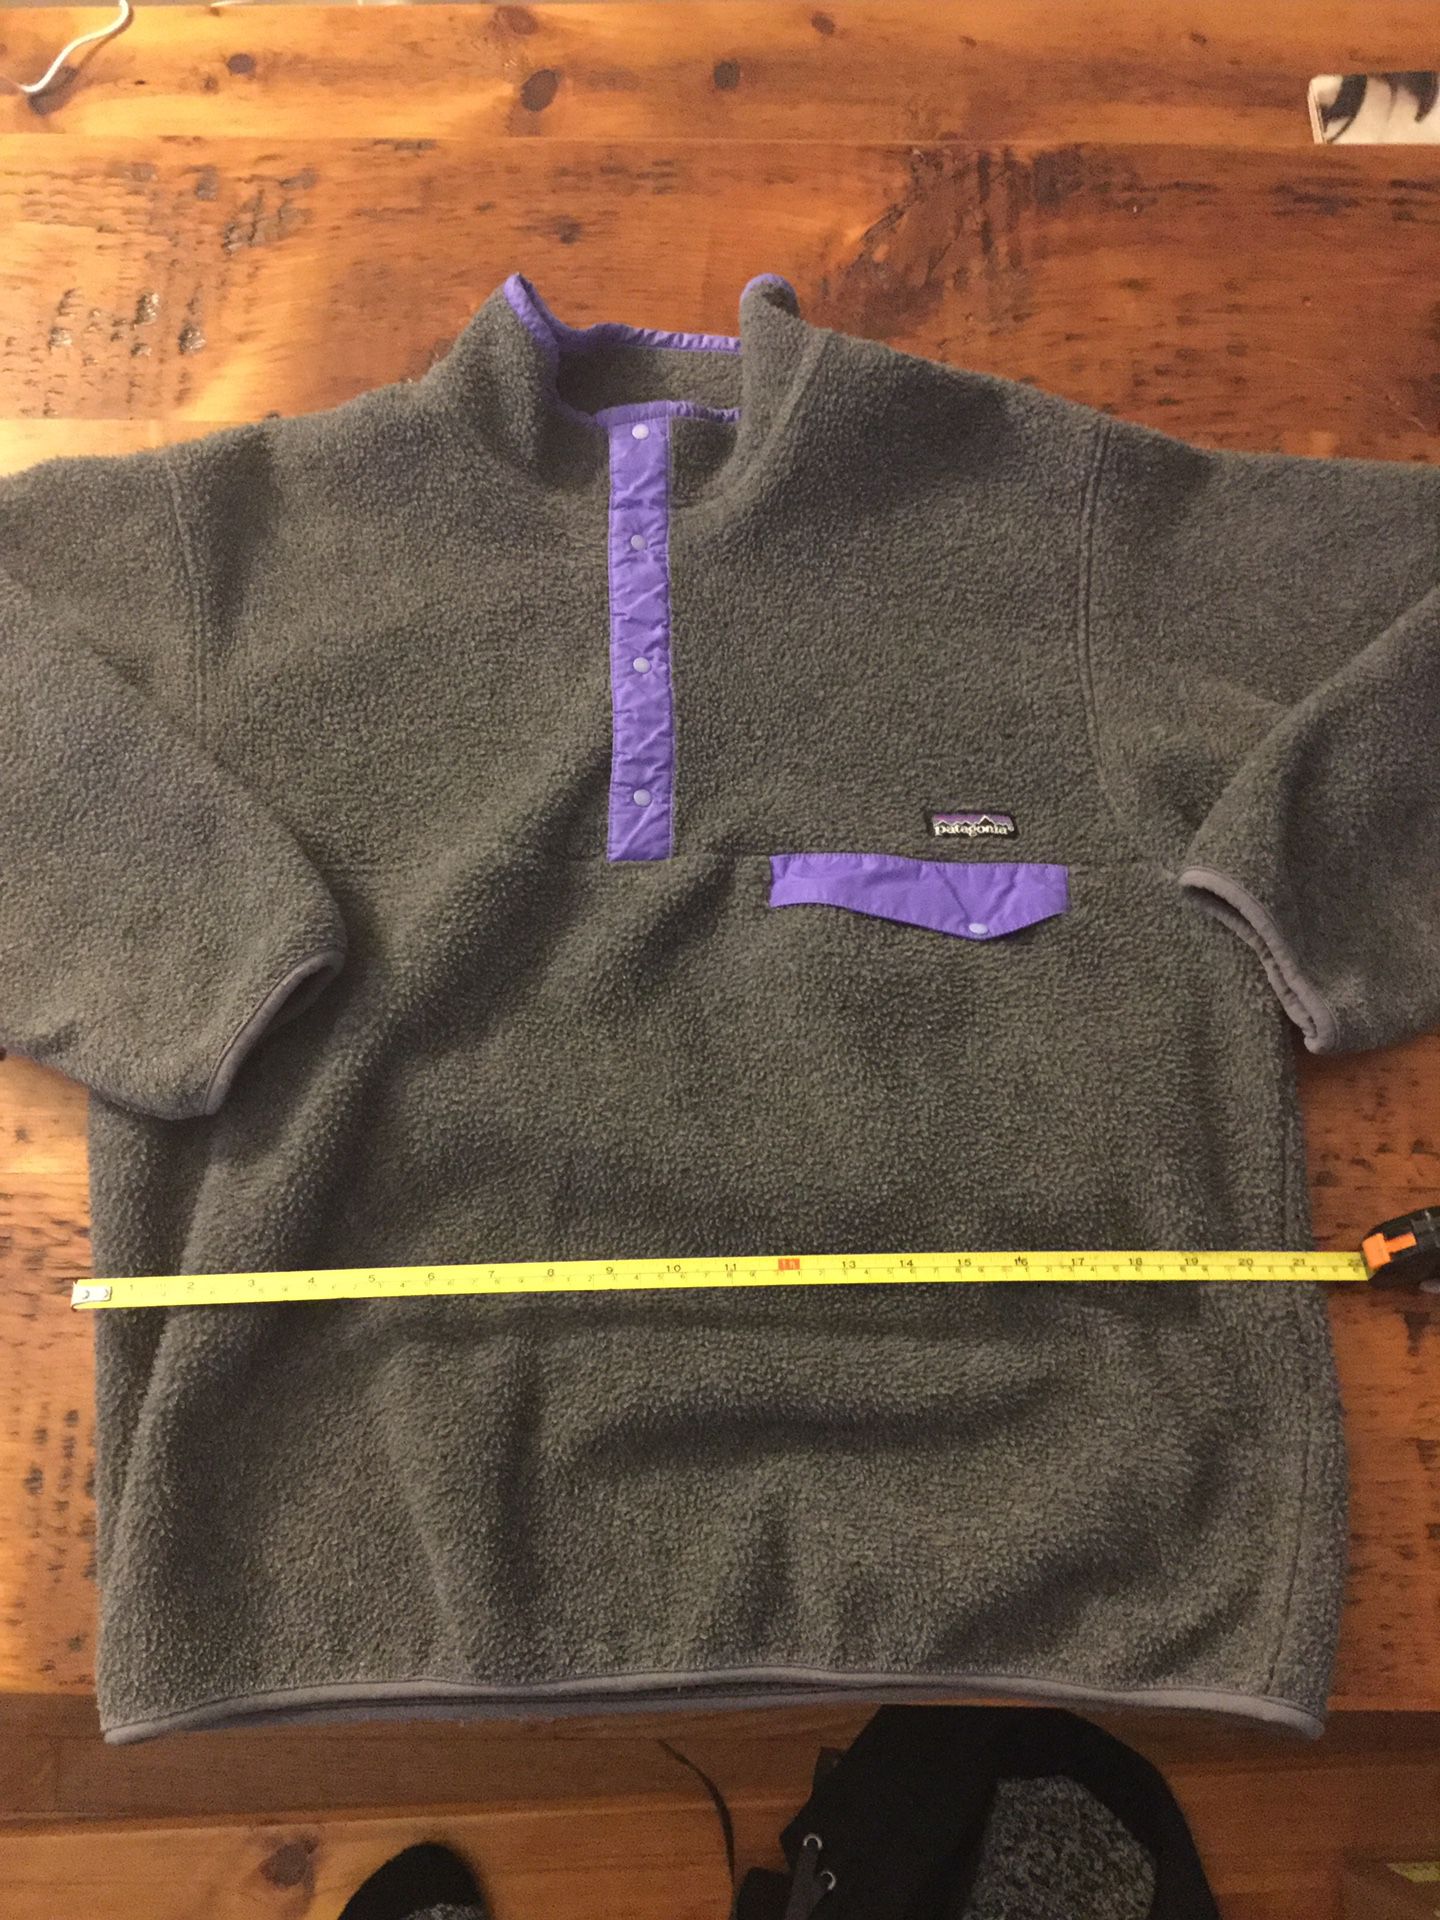 Patagonia Vintage Synchilla Snap T Fleece Grey Purple 90’s Mens Sz L. Condition is "Pre-owned" and still in great shape not much worn in a decade. 21